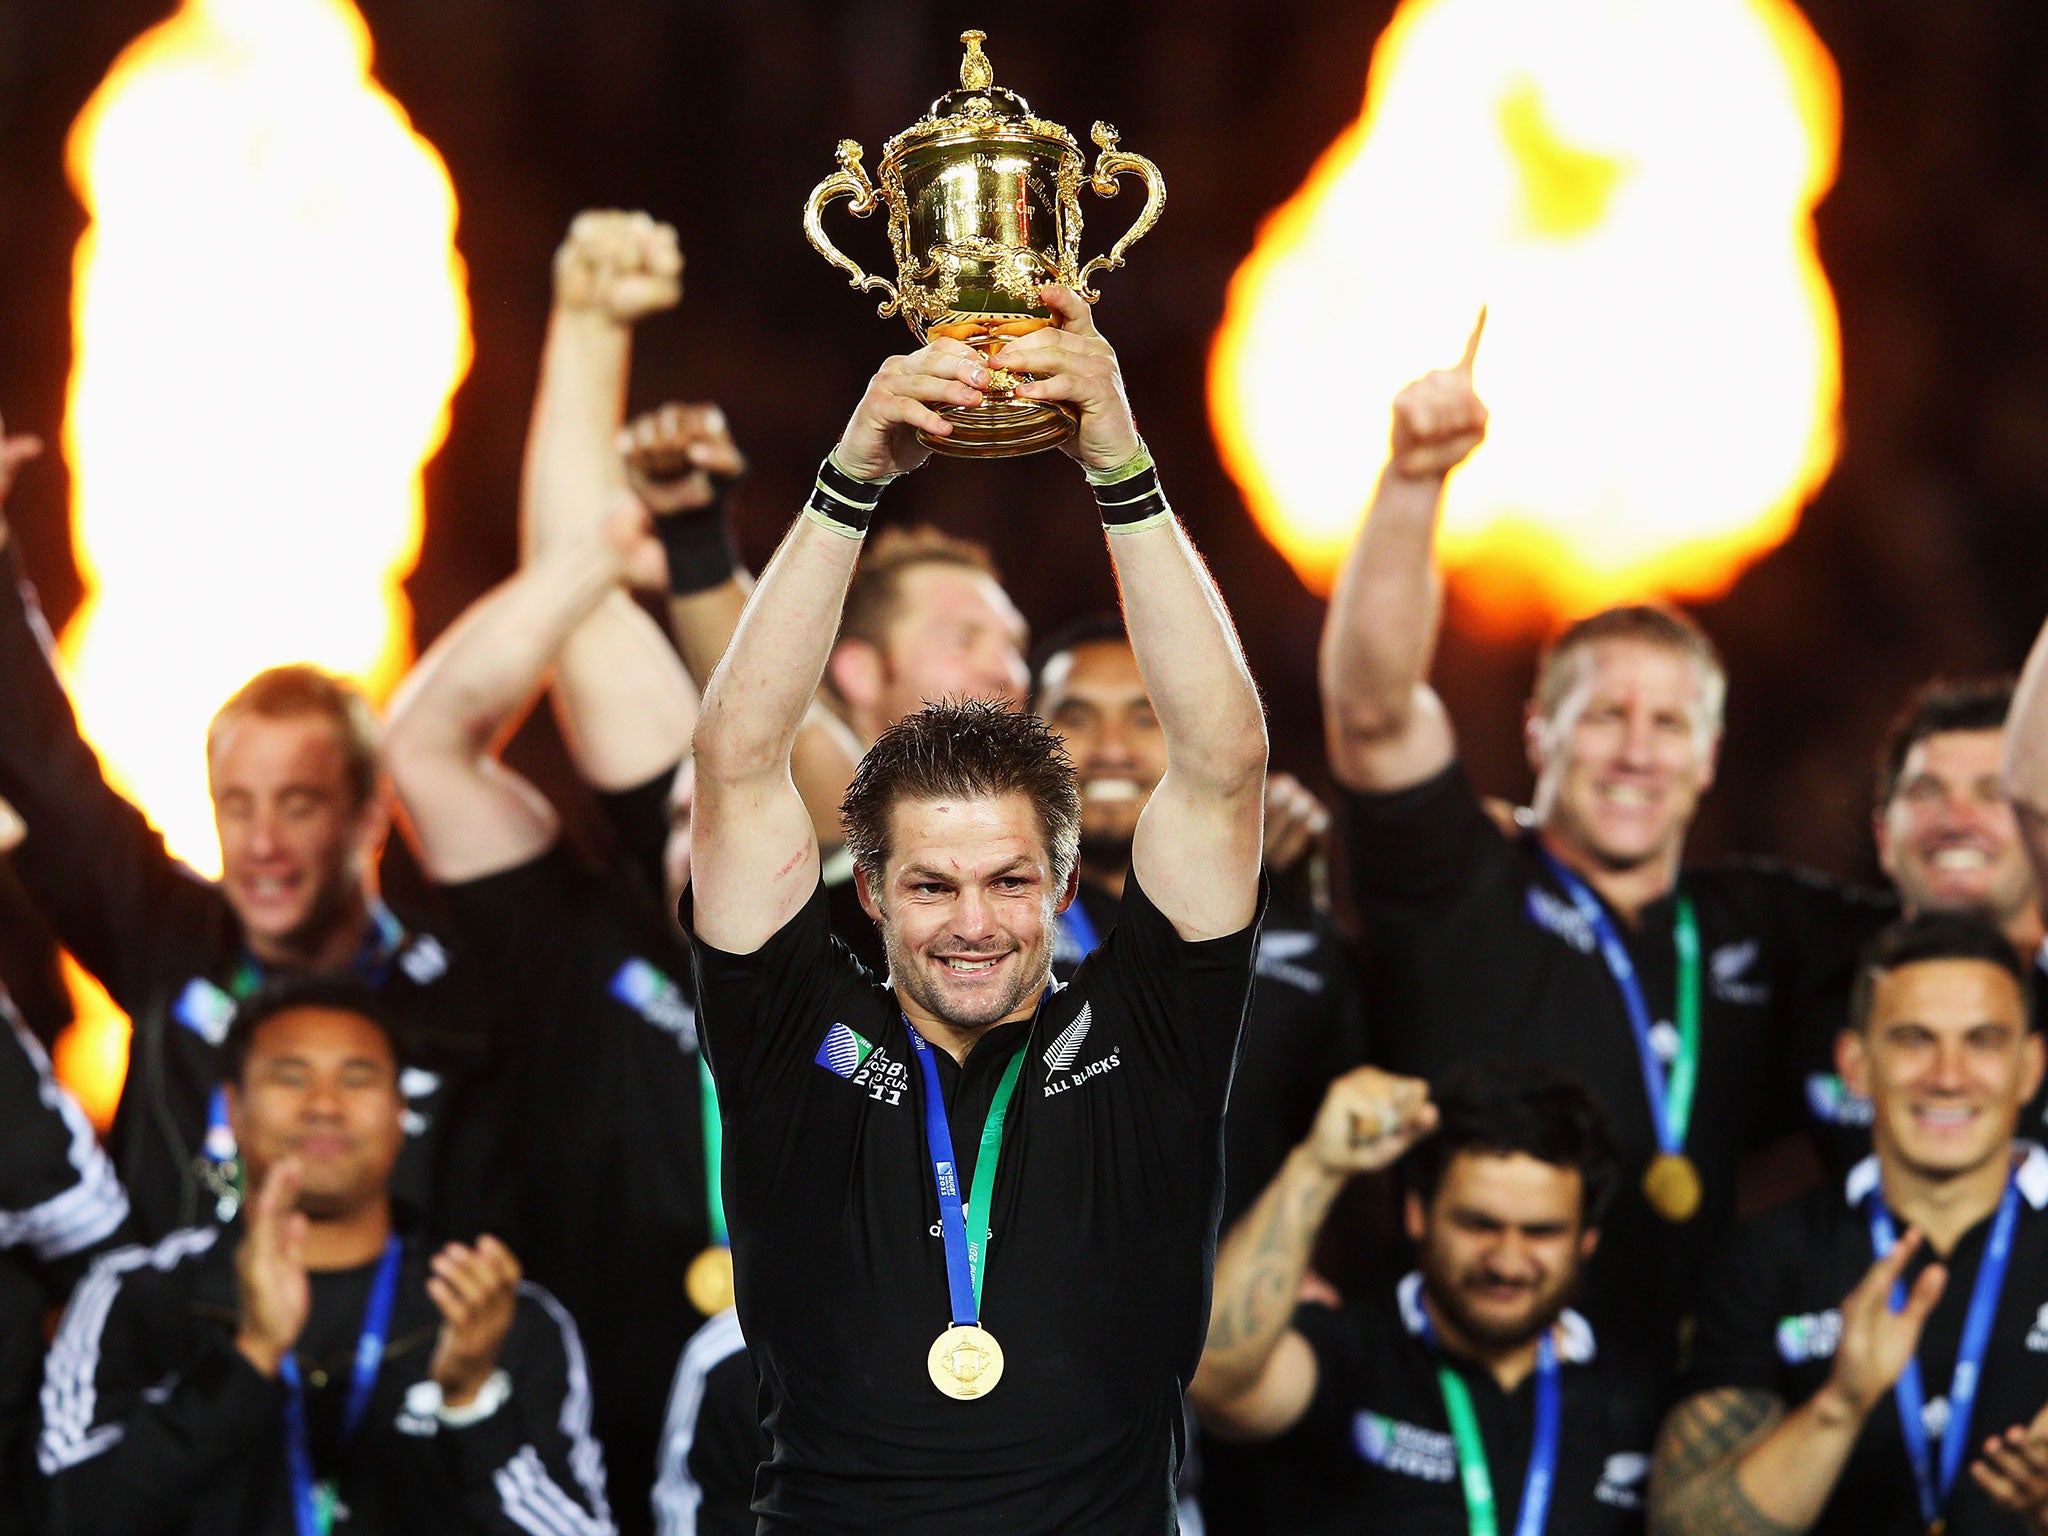 McCaw could be the first captain to win back-to-back World Cups